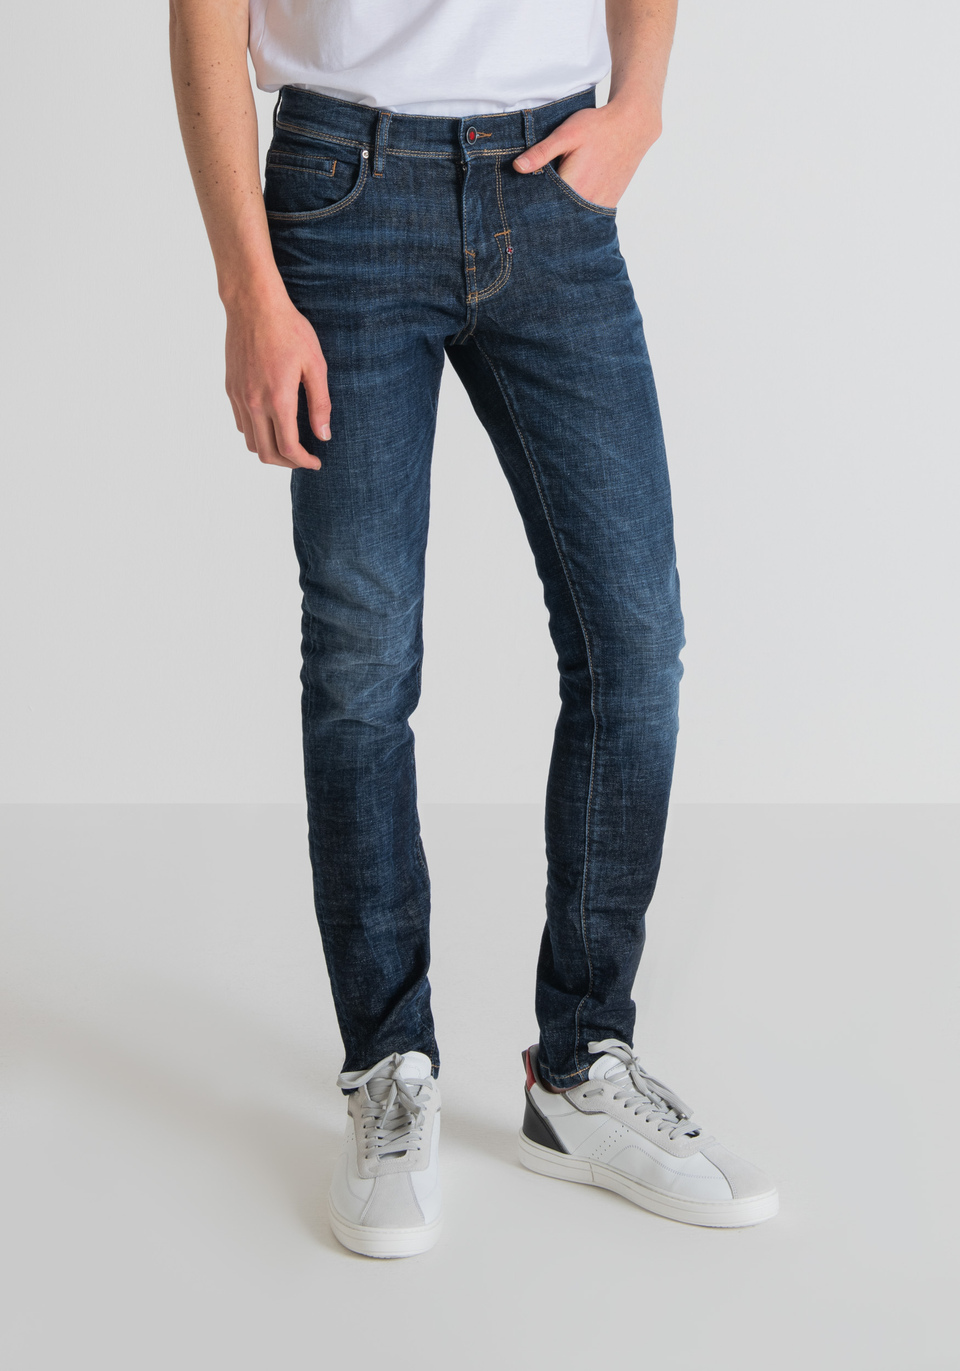 JEANS SUPER SKINNY FIT „GILMOUR“ AUS RECYCELTER BAUMWOLLE - Antony Morato Online Shop